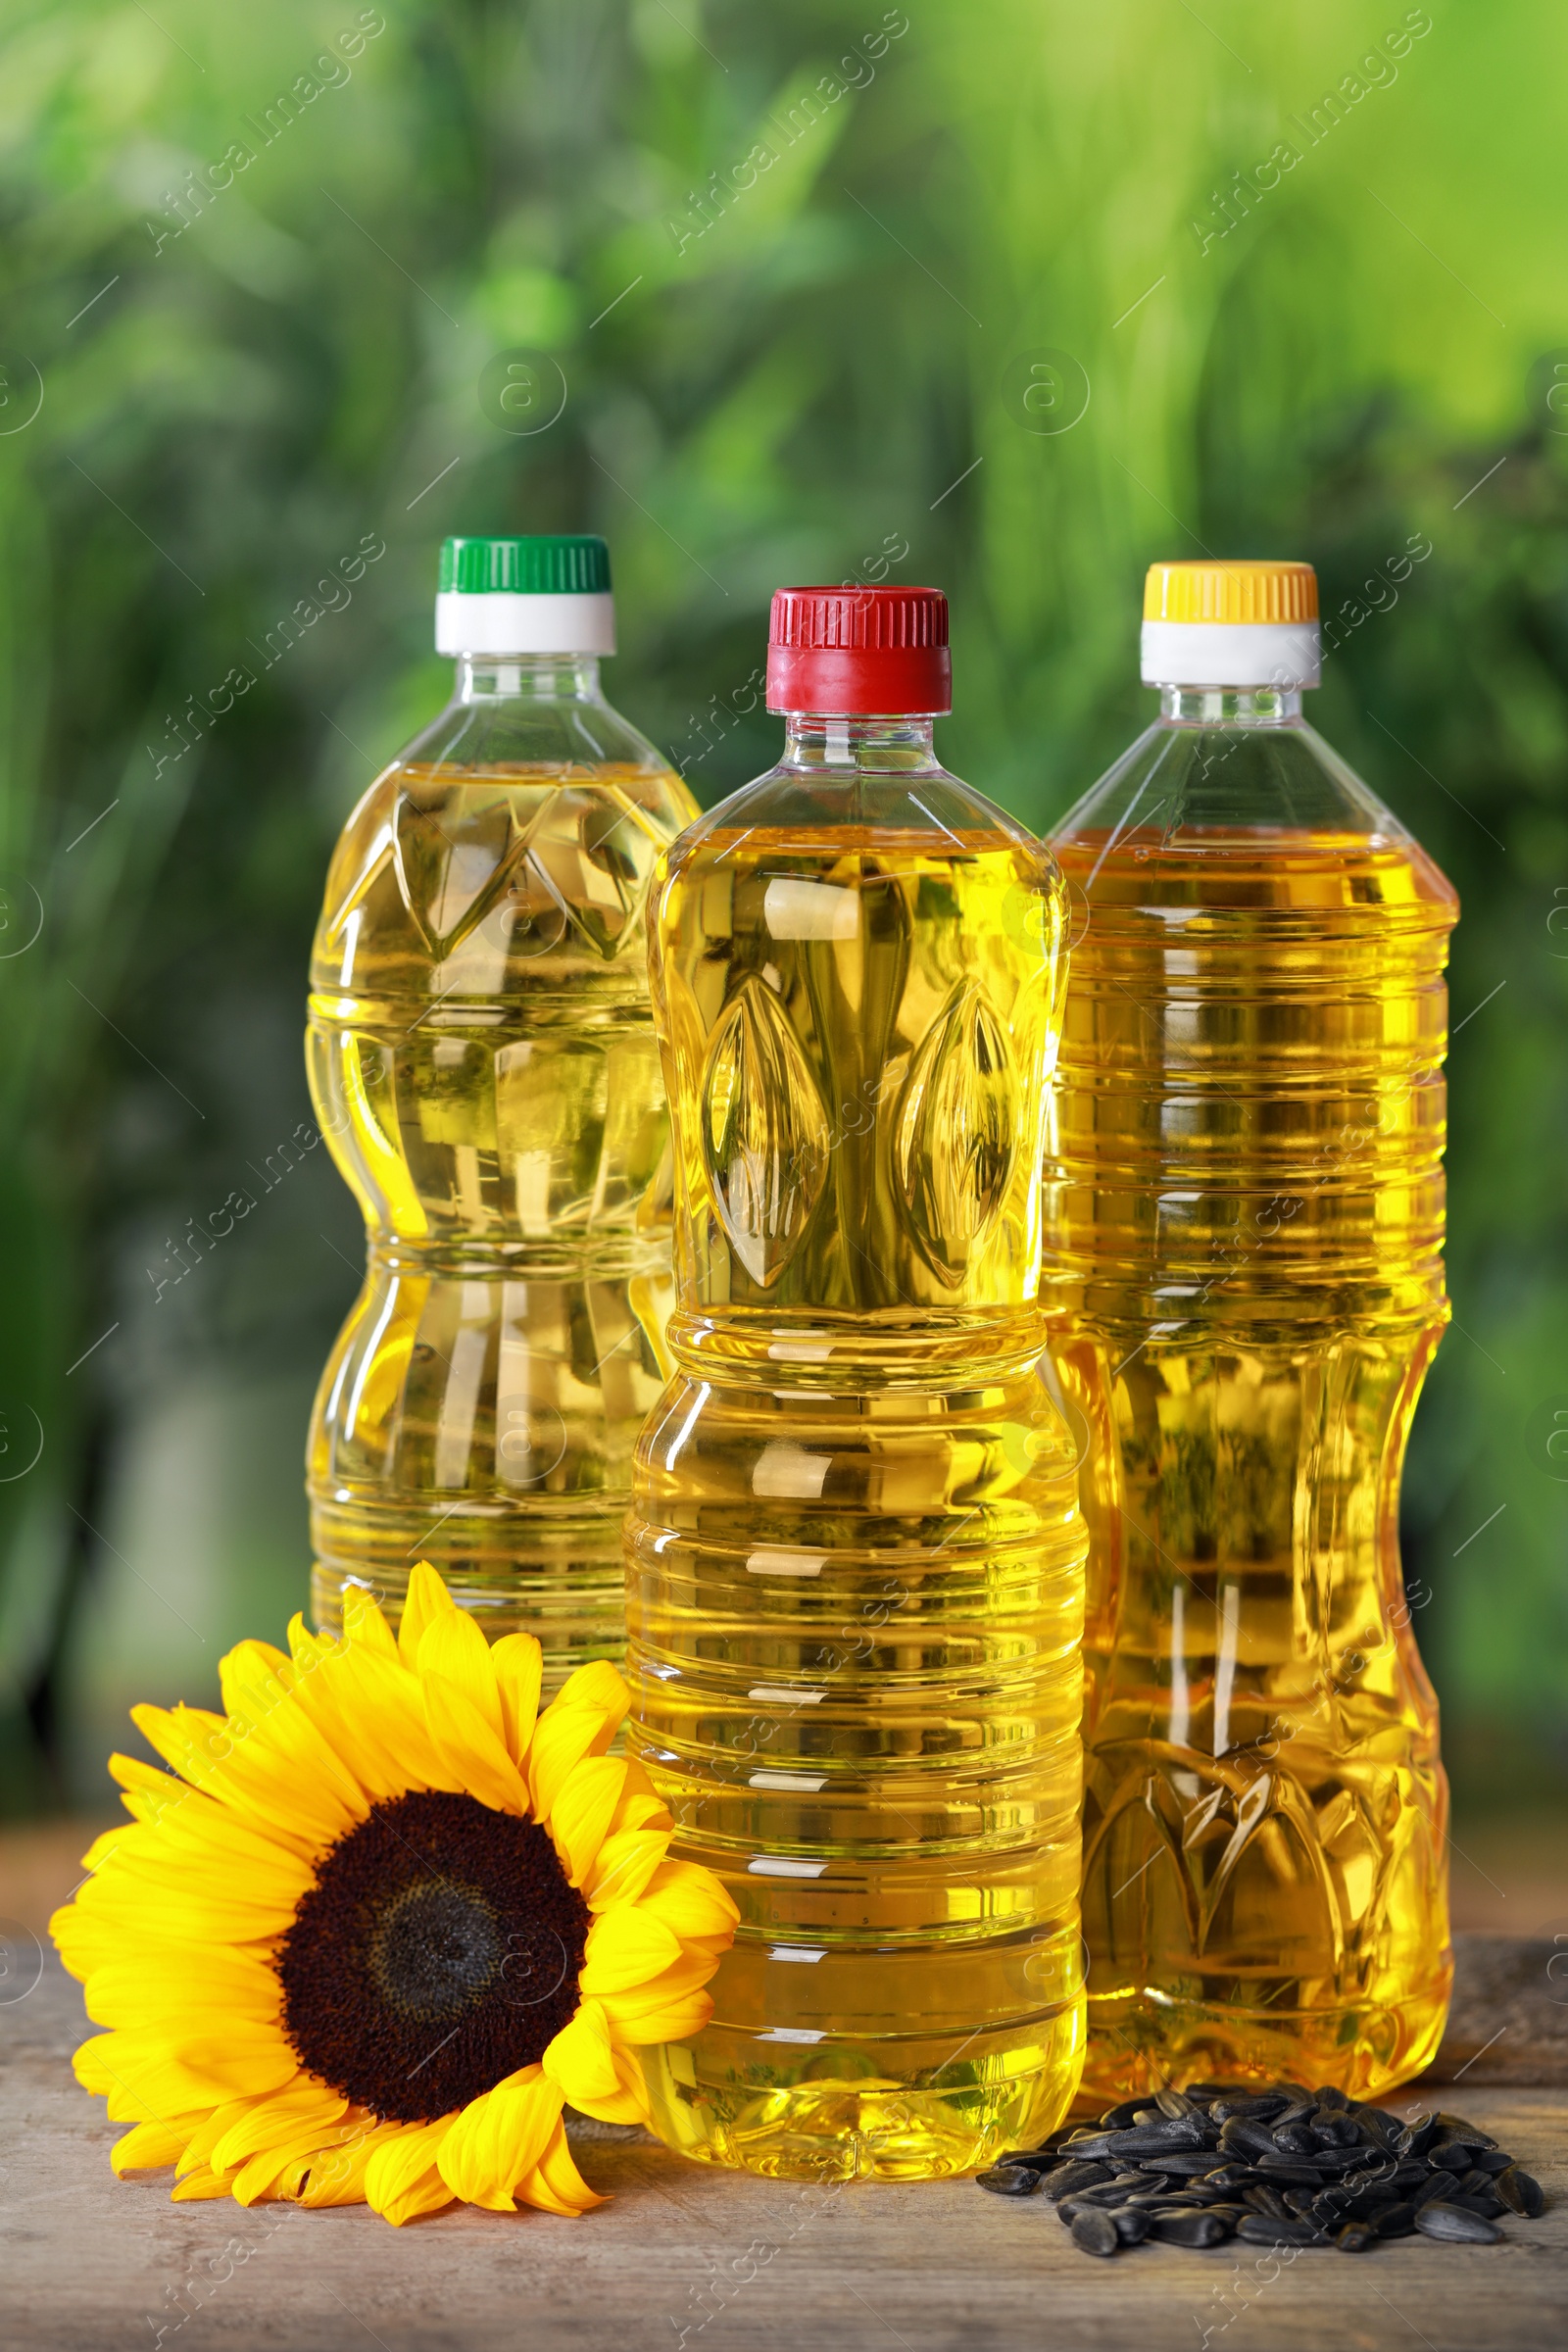 Photo of Bottles of cooking oil, sunflower and seeds on wooden table against blurred background